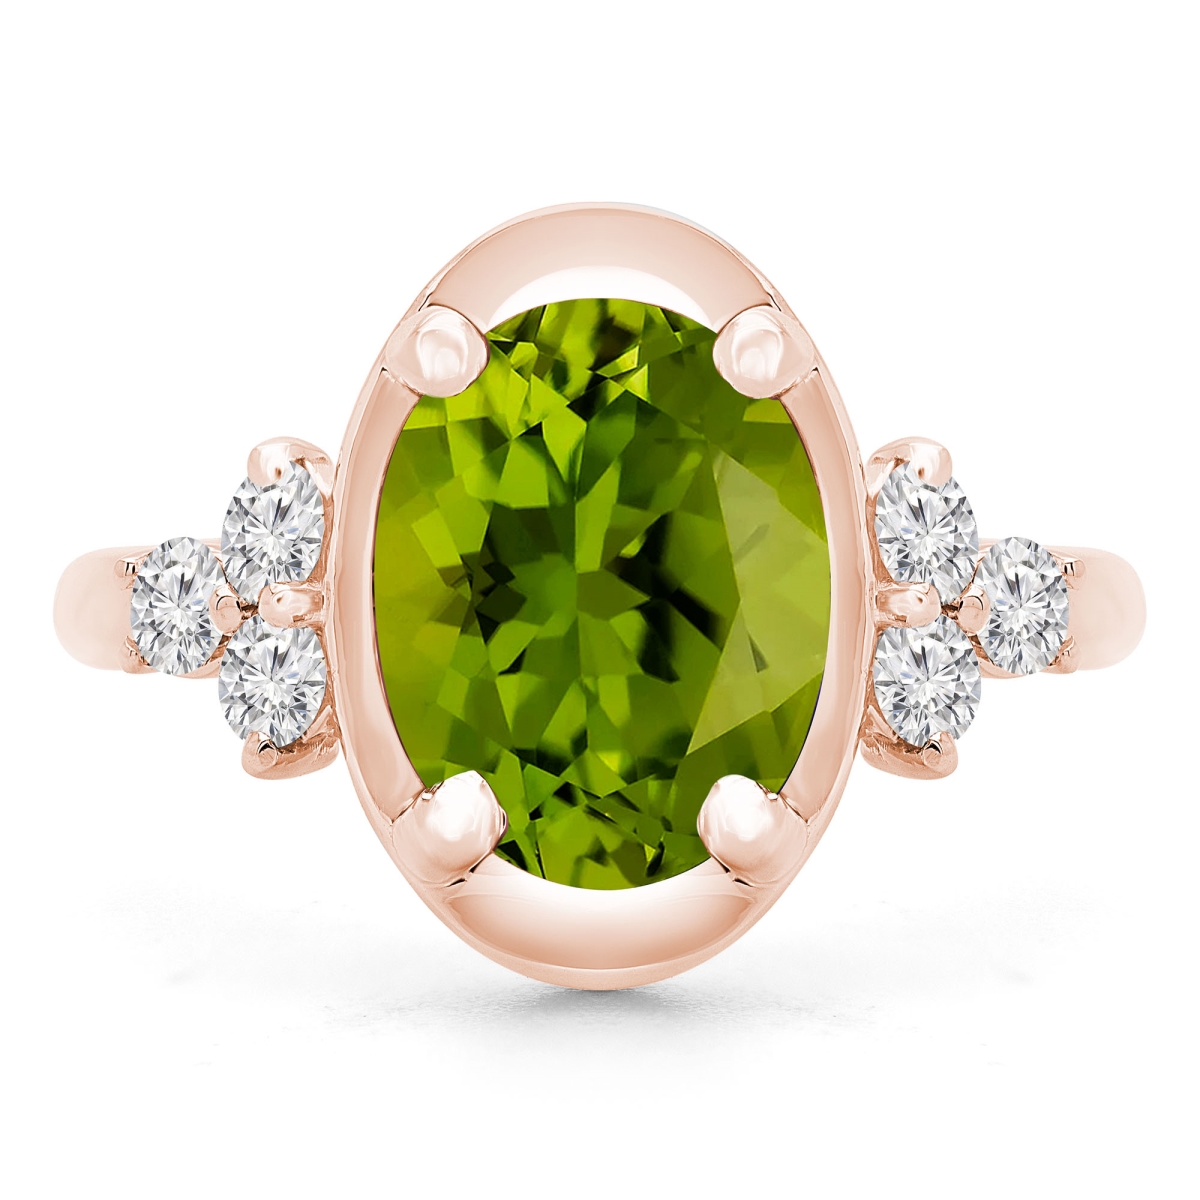 Picture of Majesty Diamonds MD190412-8.5 3.9 CTW Oval Green Peridot Cocktail Ring in 14K Rose Gold - Size 8.5